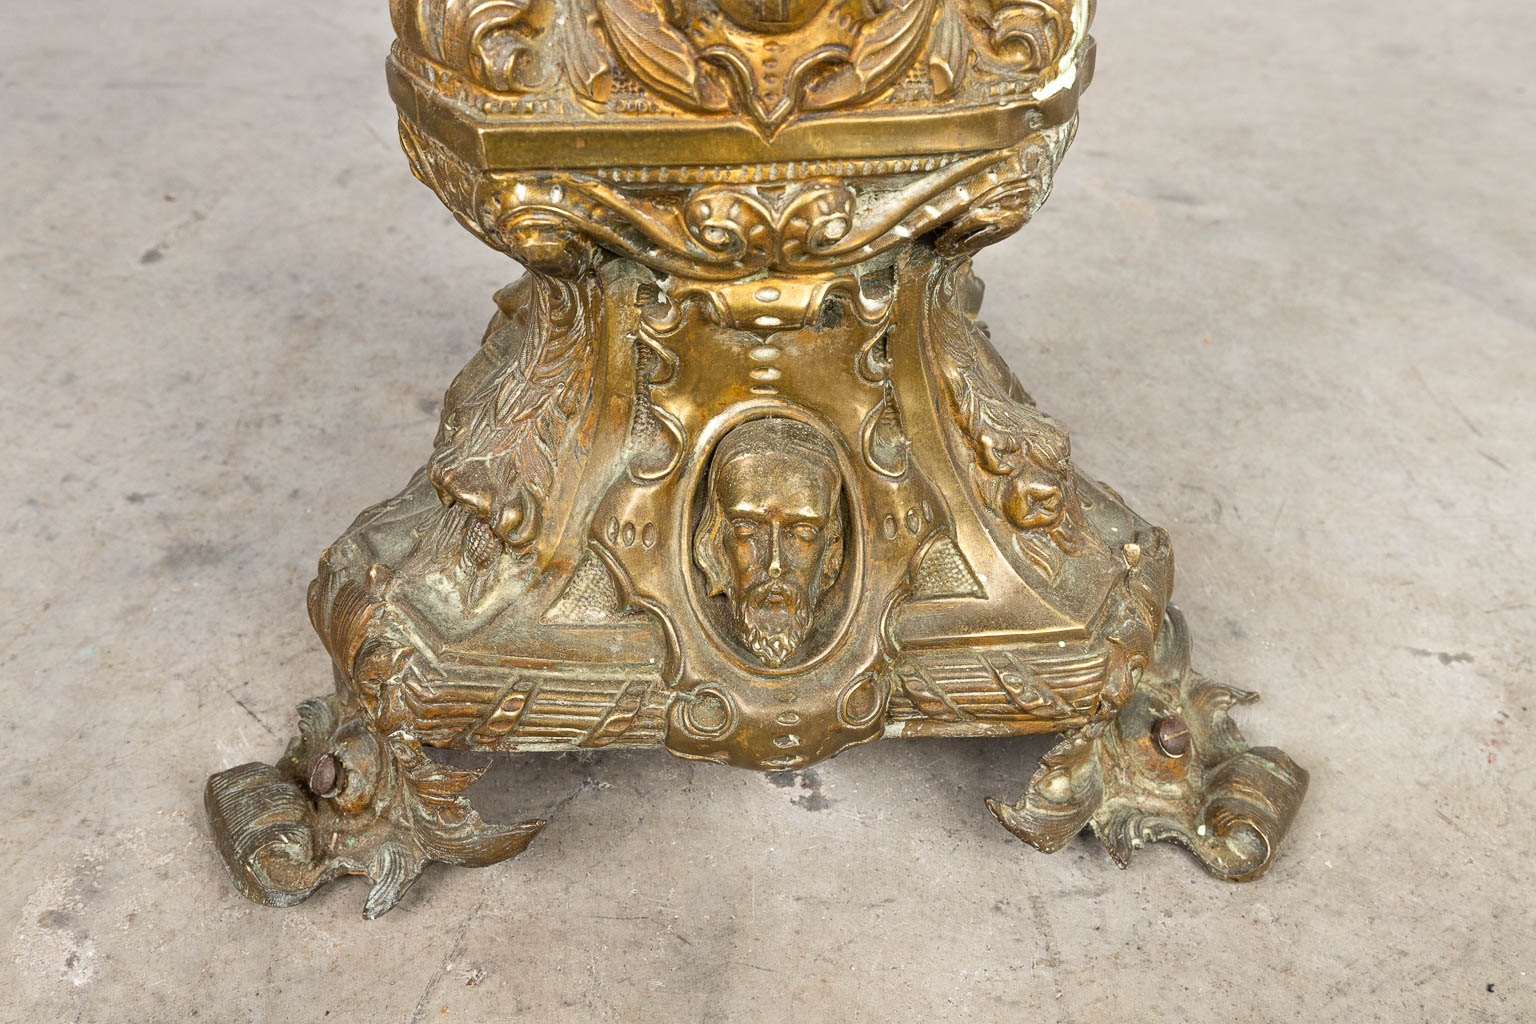 A large candlestick made of bronze and decorated with figurines. (H:125cm)